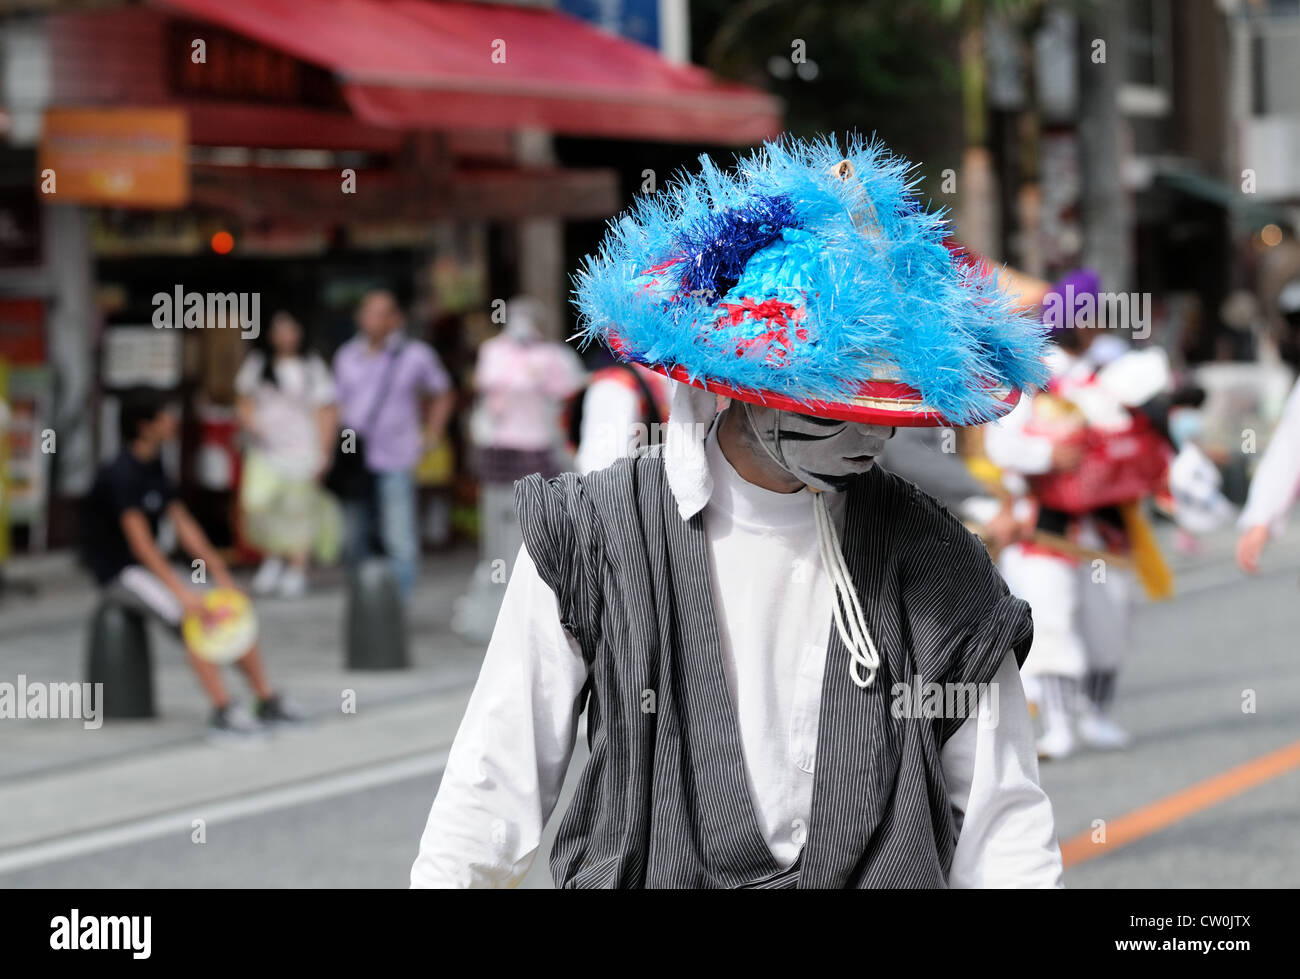 A dancer during an 'eisa' event in Naha, Okinawa walks to the next performance location. Stock Photo